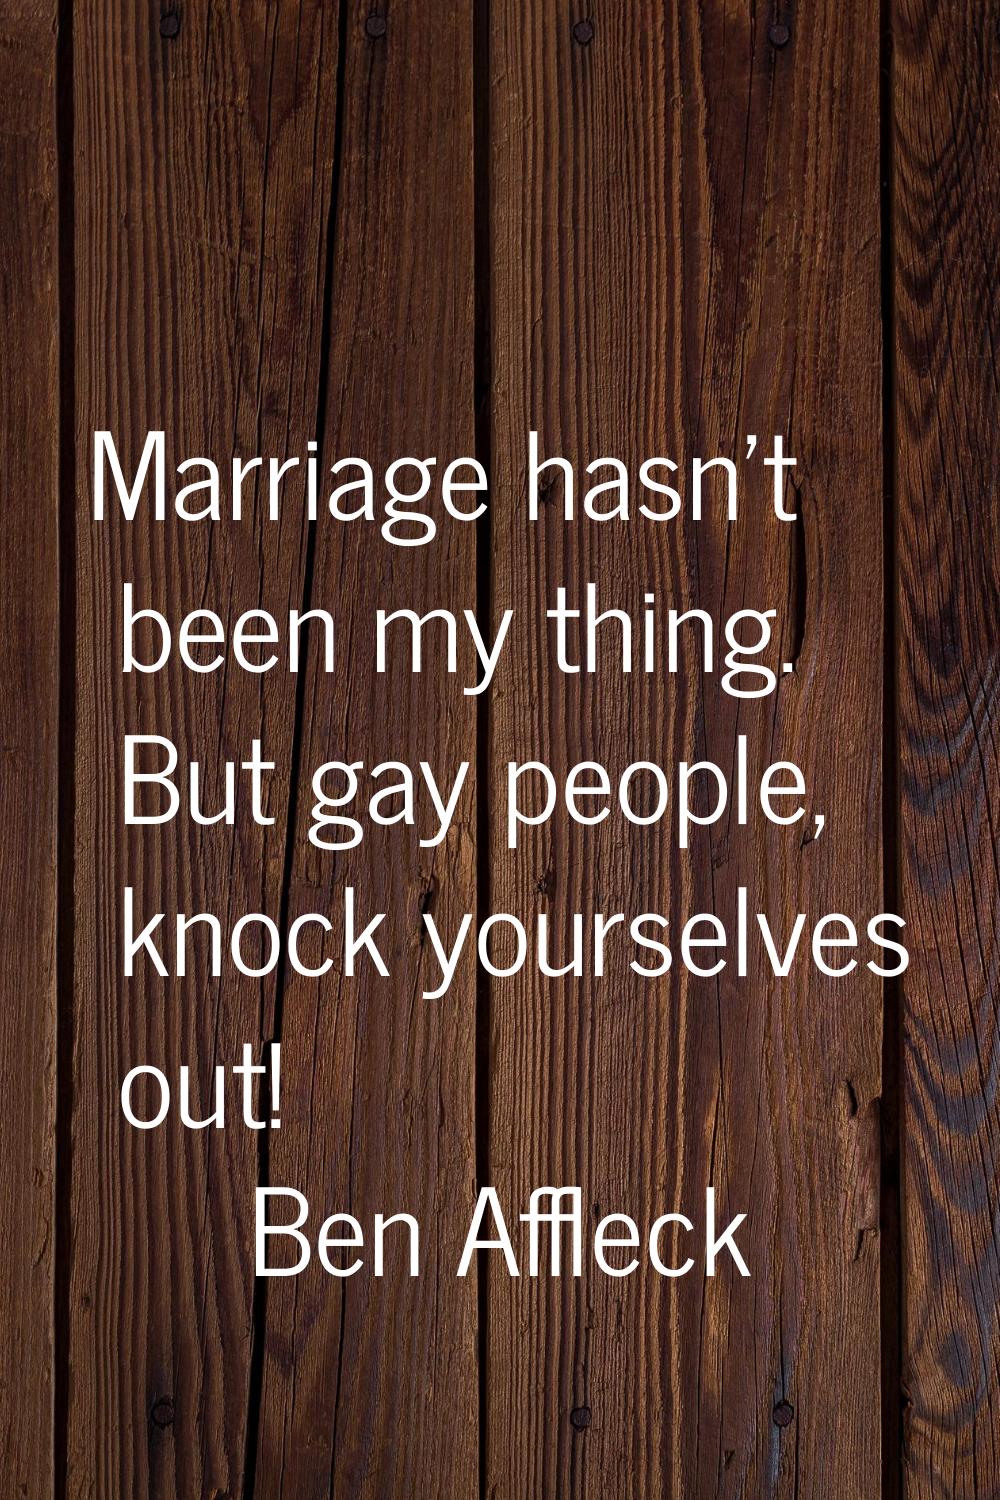 Marriage hasn't been my thing. But gay people, knock yourselves out!